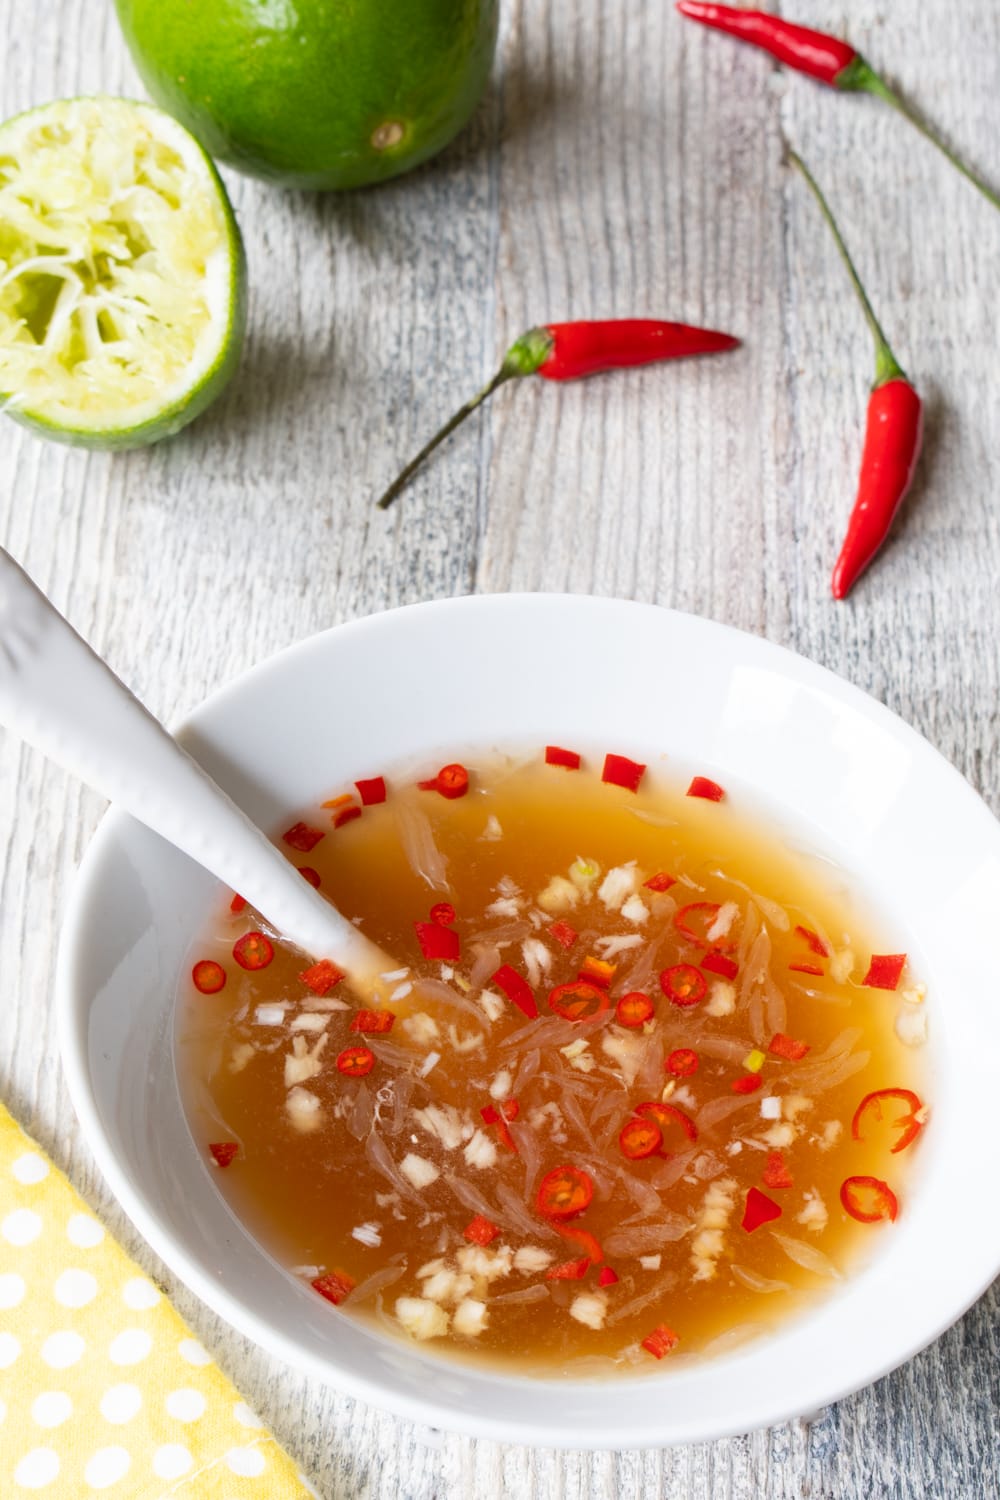 Nuoc Cham (Vietnamese Dipping Sauce)